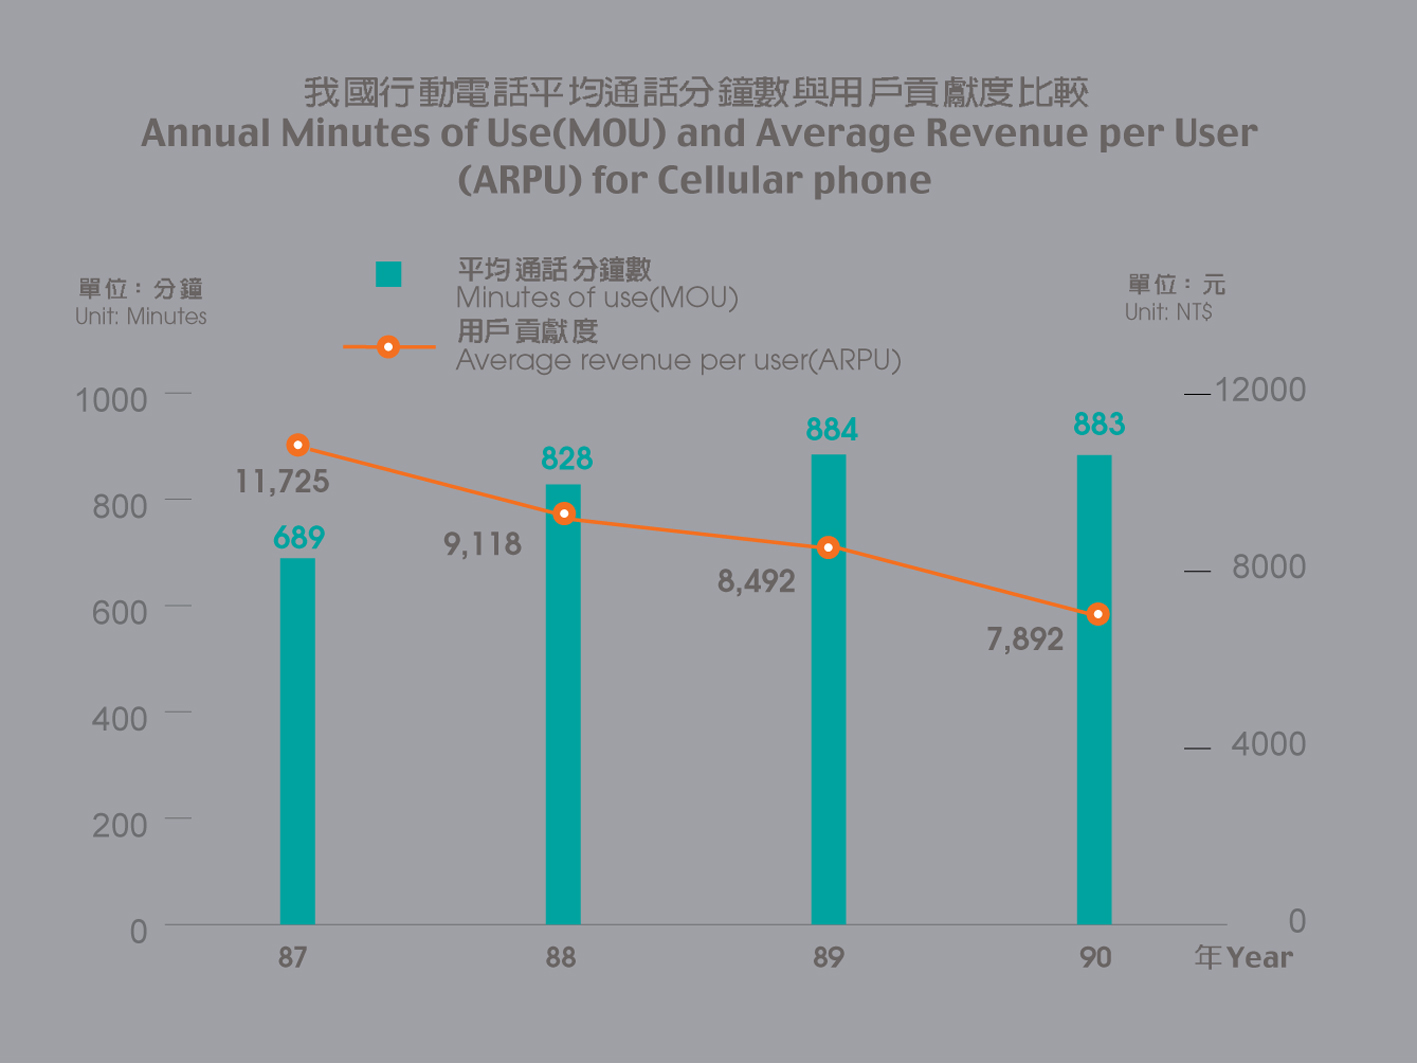 Annual Minutes of Use(MOU) and Average Revenue per User (ARPU) for cellular phone